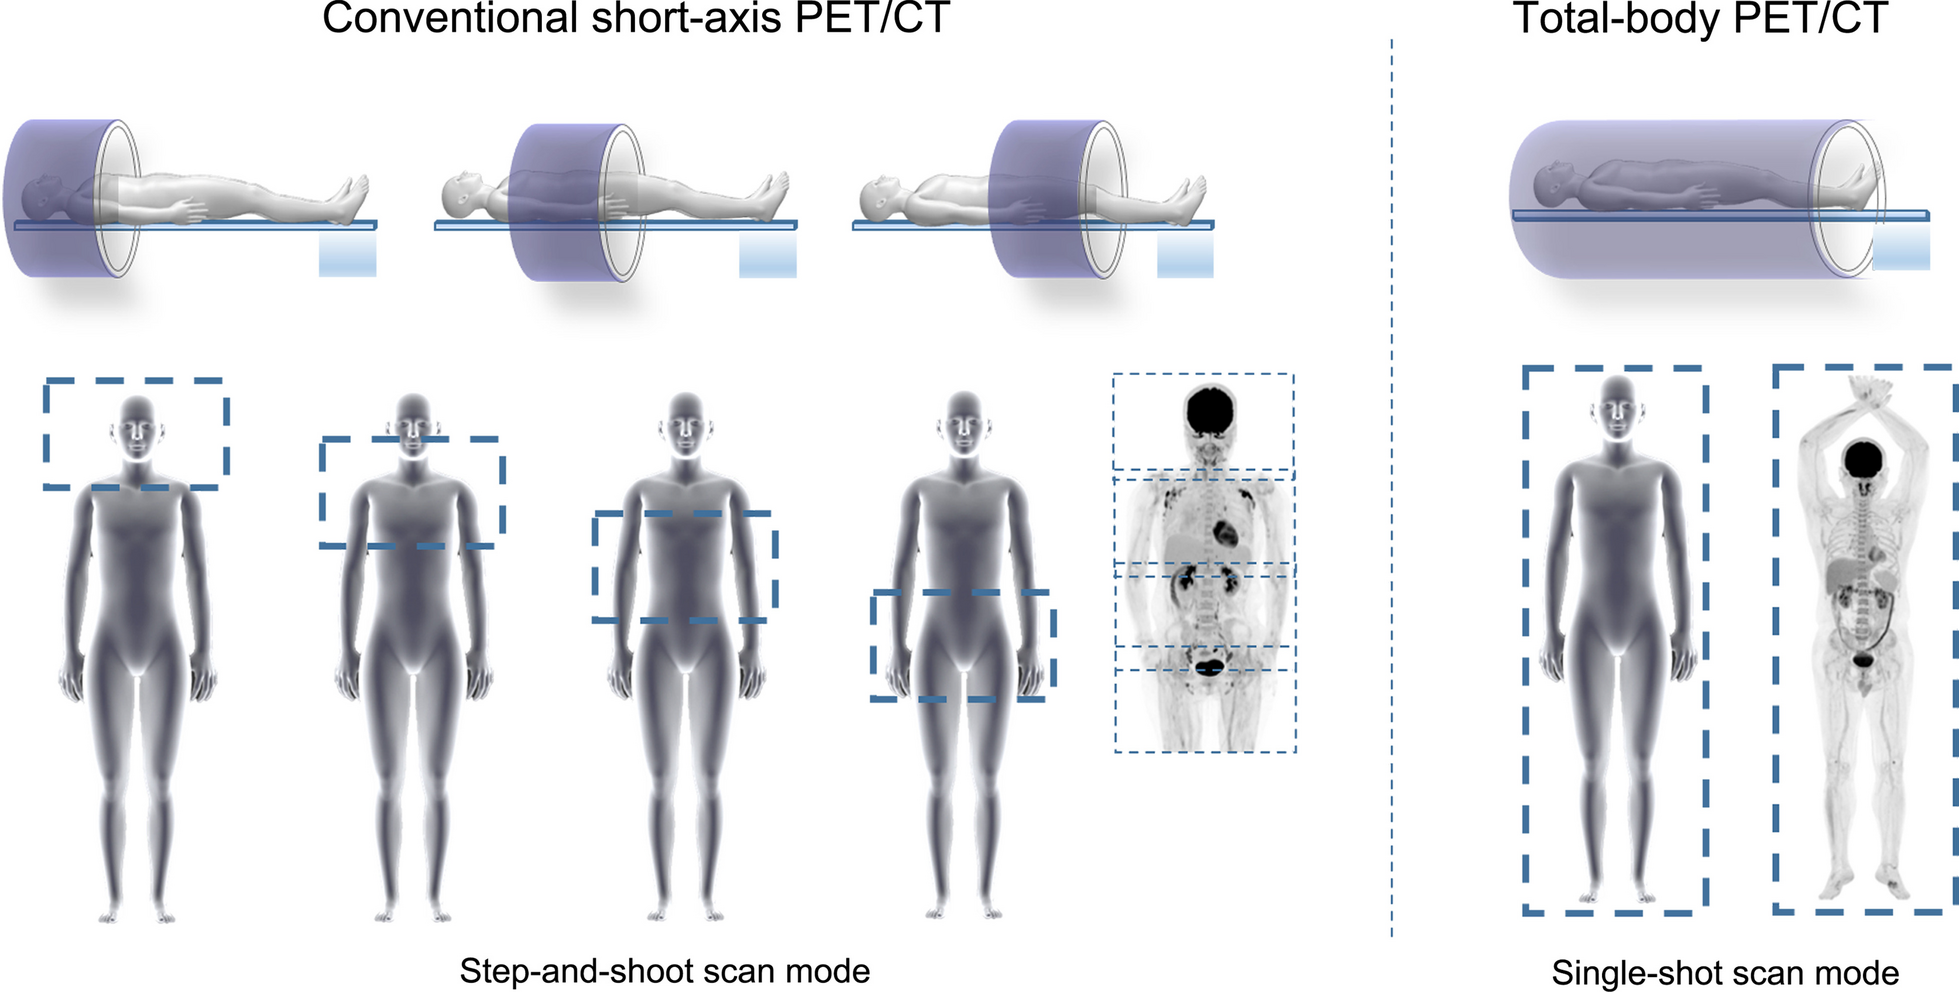 Performance and application of the total-body PET/CT scanner: a literature review